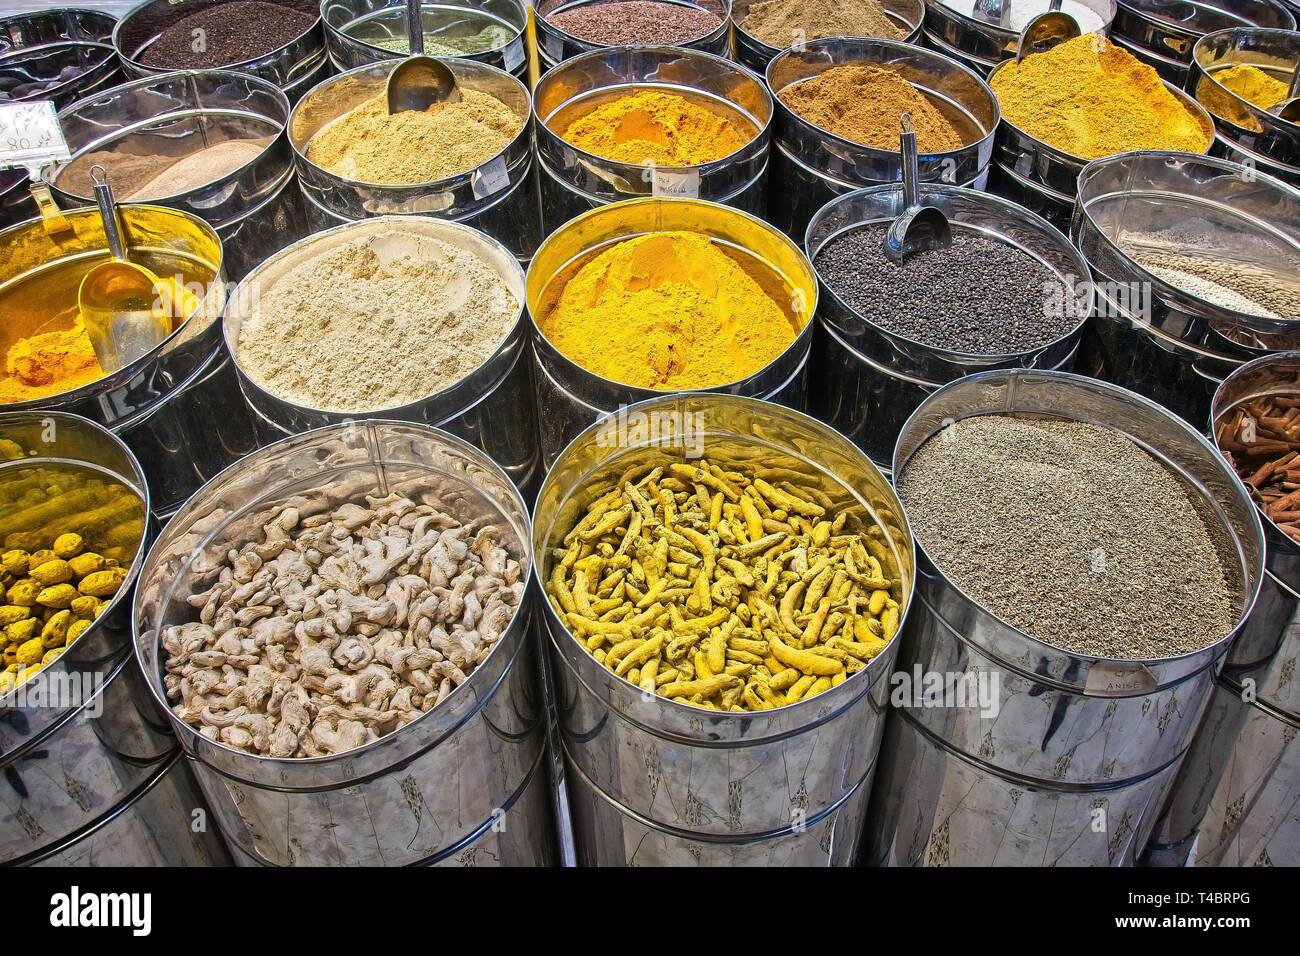 Indian spices at the market in Dubai. Stock Photo